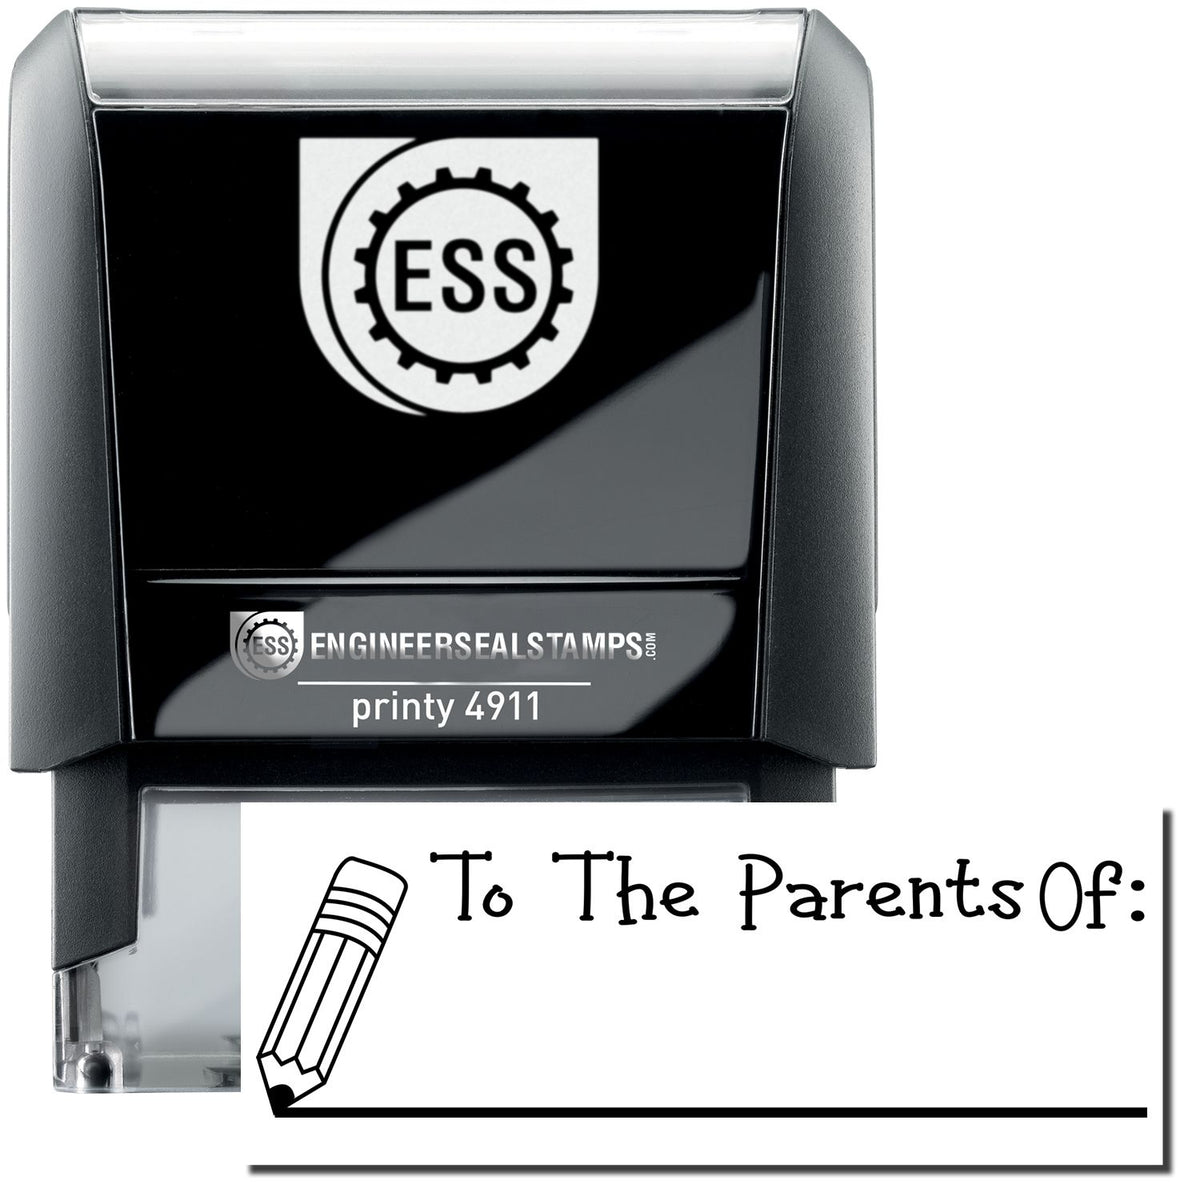 A self-inking stamp with a stamped image showing how the text &quot;To The Parents Of:&quot; with an image of a pencil next to the line is displayed after stamping.